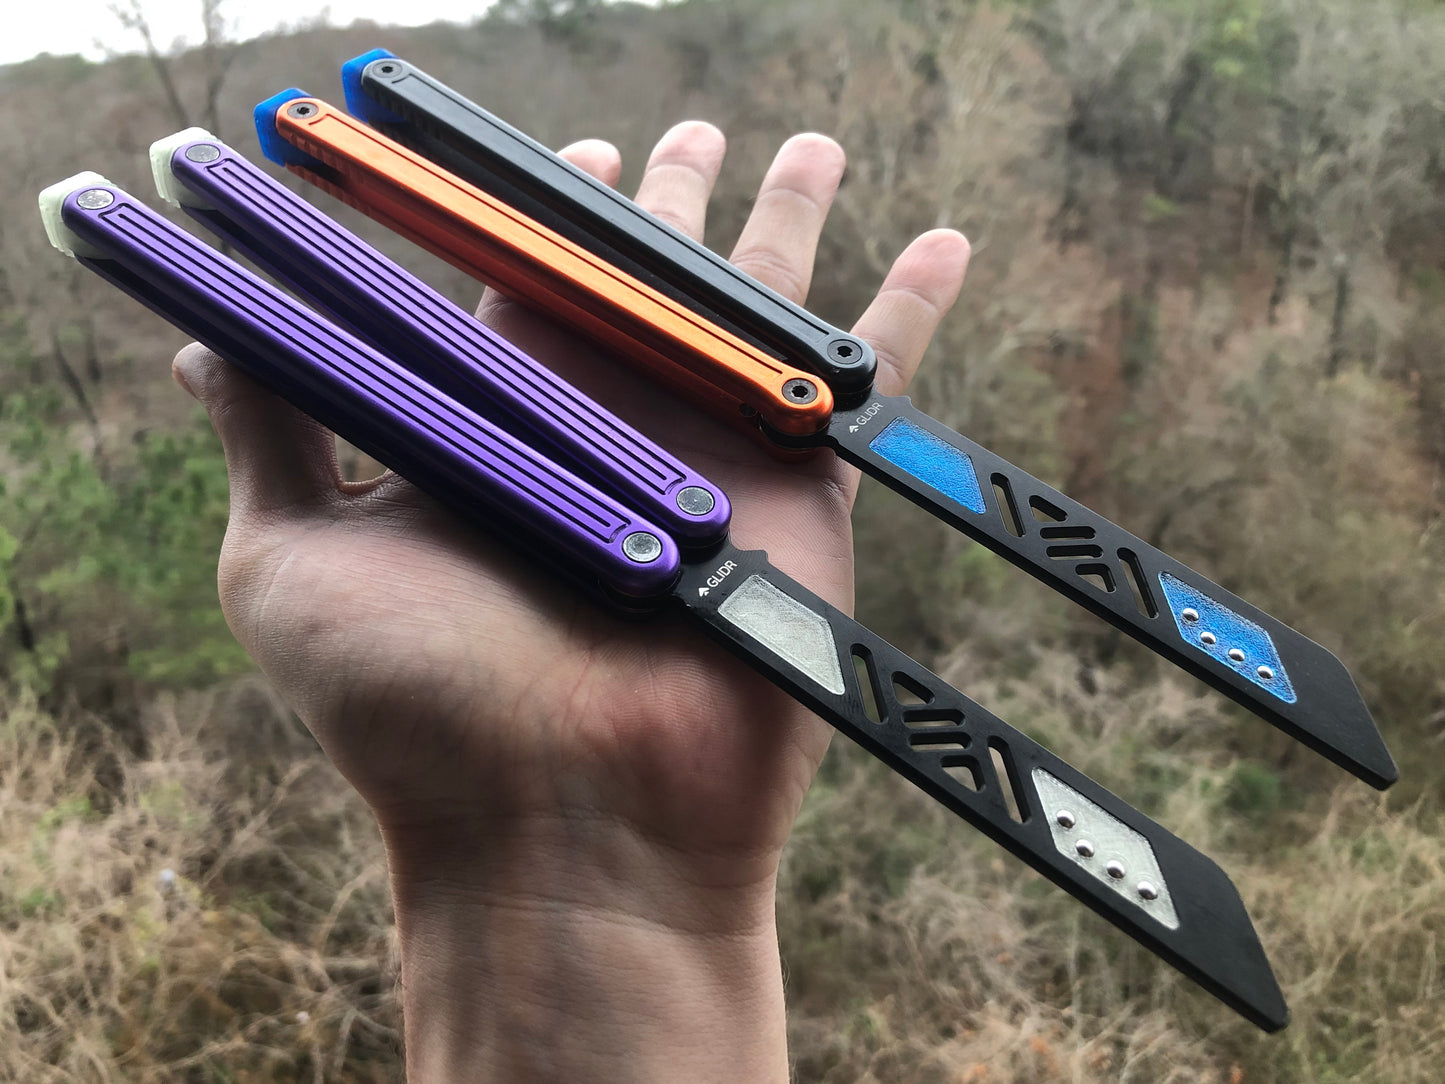 Reduce the handle bias and adjust the balance of your Glidr Arctic, Antarctic, and Bermuda balisong trainers with tungsten-weighted Zippy blade inserts and spacers featuring adjustable balance and positive jimping.